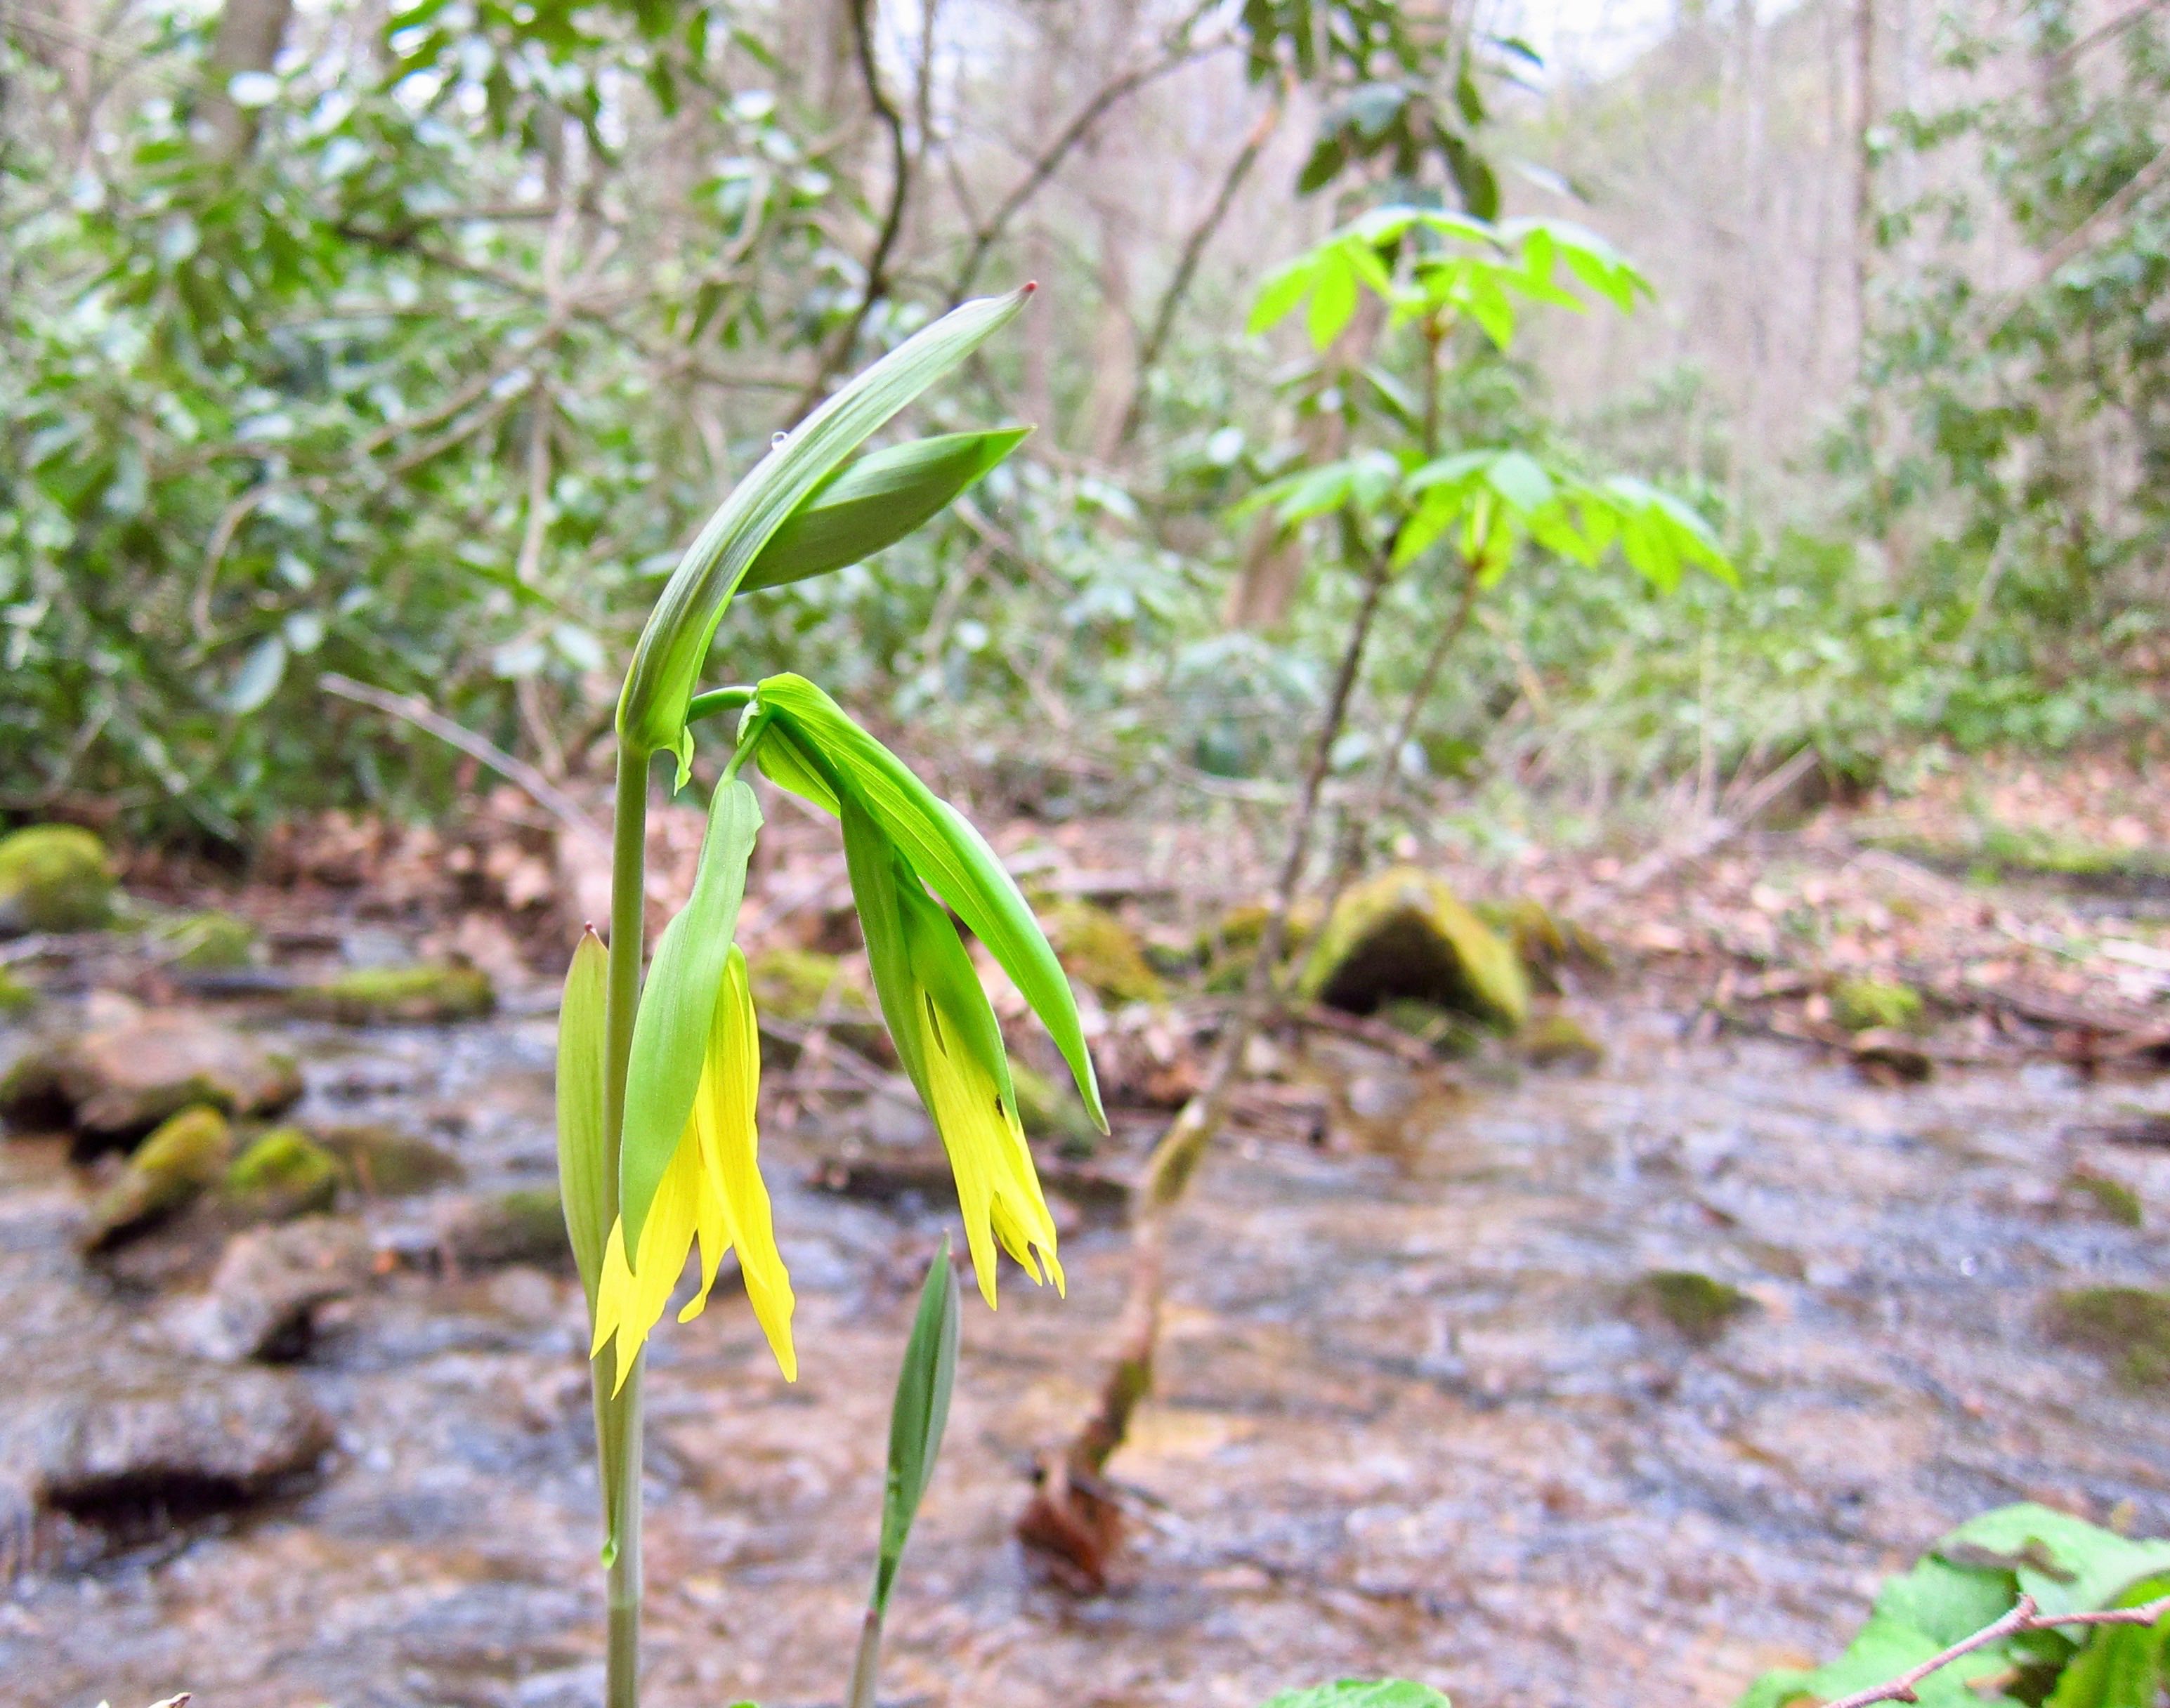 The Scientific Name is Uvularia grandiflora. You will likely hear them called Large-flowered Bellwort. This picture shows the A Beautiful Gathering creekside of Uvularia grandiflora